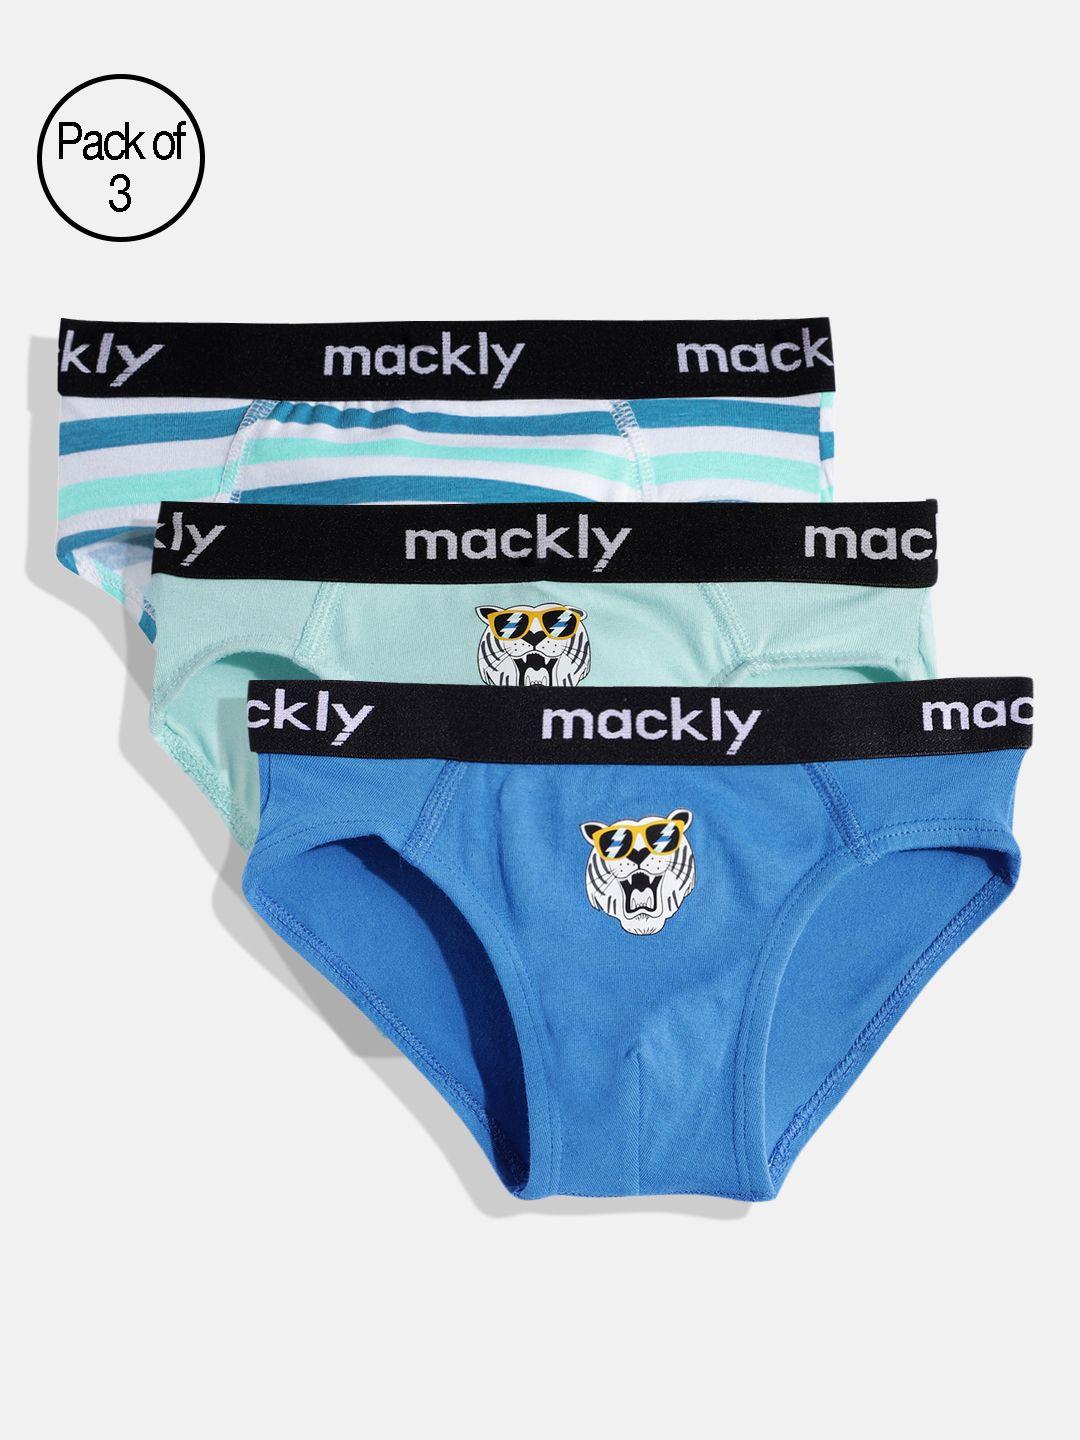 mackly boys pack of 3 blue & white printed briefs